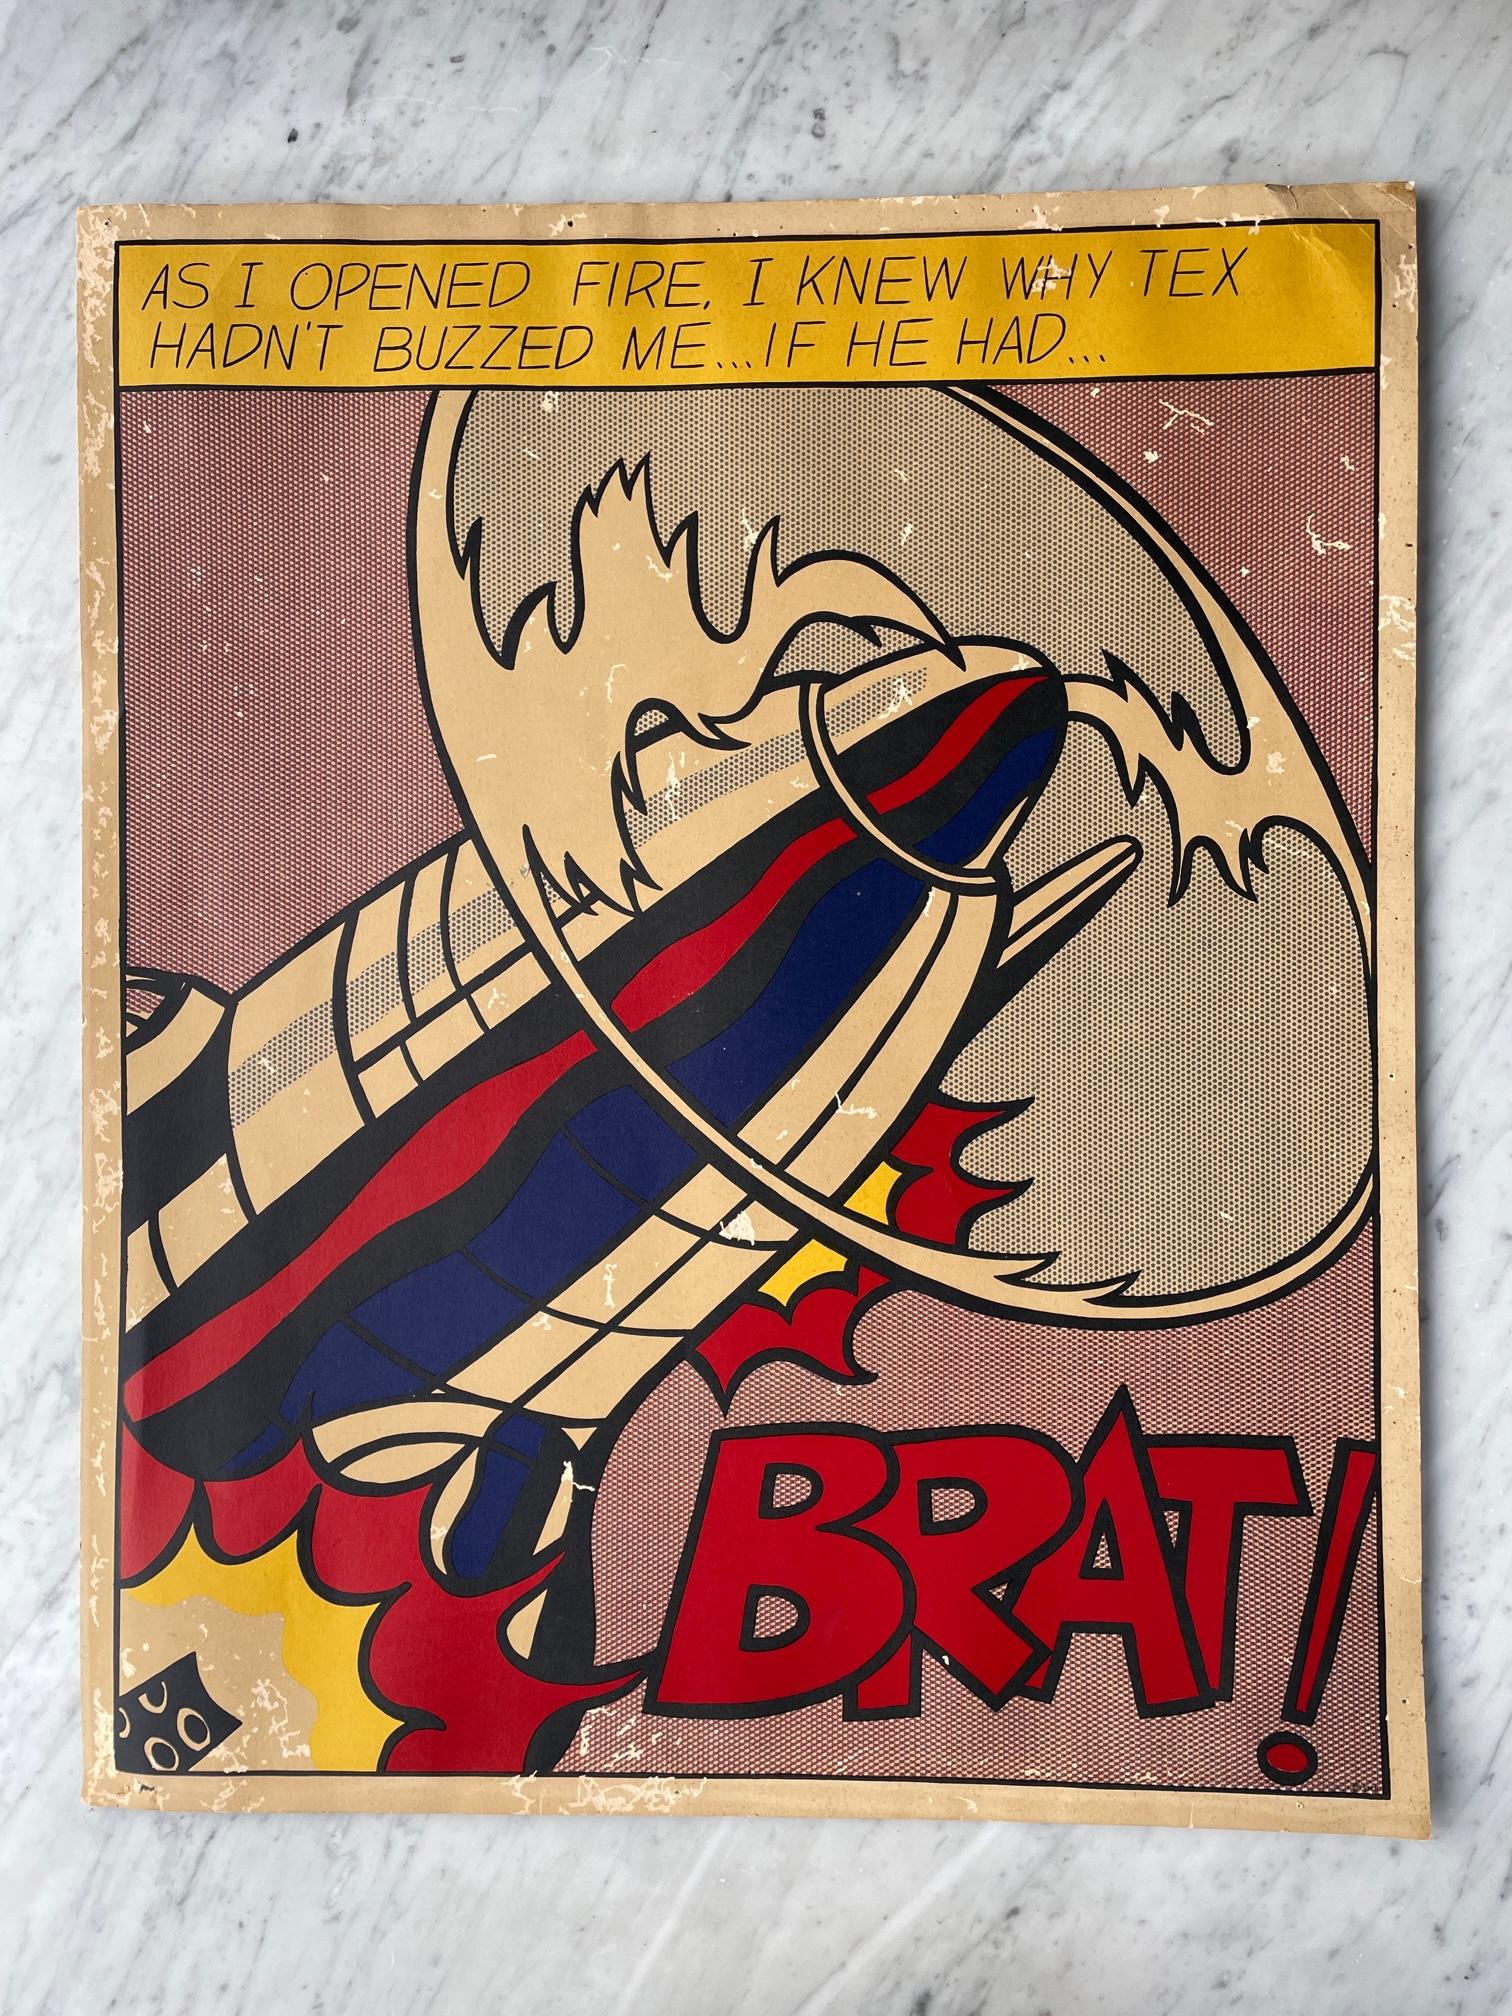 Includes the complete three poster set. All vintage originals. Barn find!

NETH, c.1966. Roy Lichtenstein (1923-1997) : as i opened fire (Triptych). Offset Lithographs in colors on three sheets of wove paper. Edition: 3000 plus proofs in each print